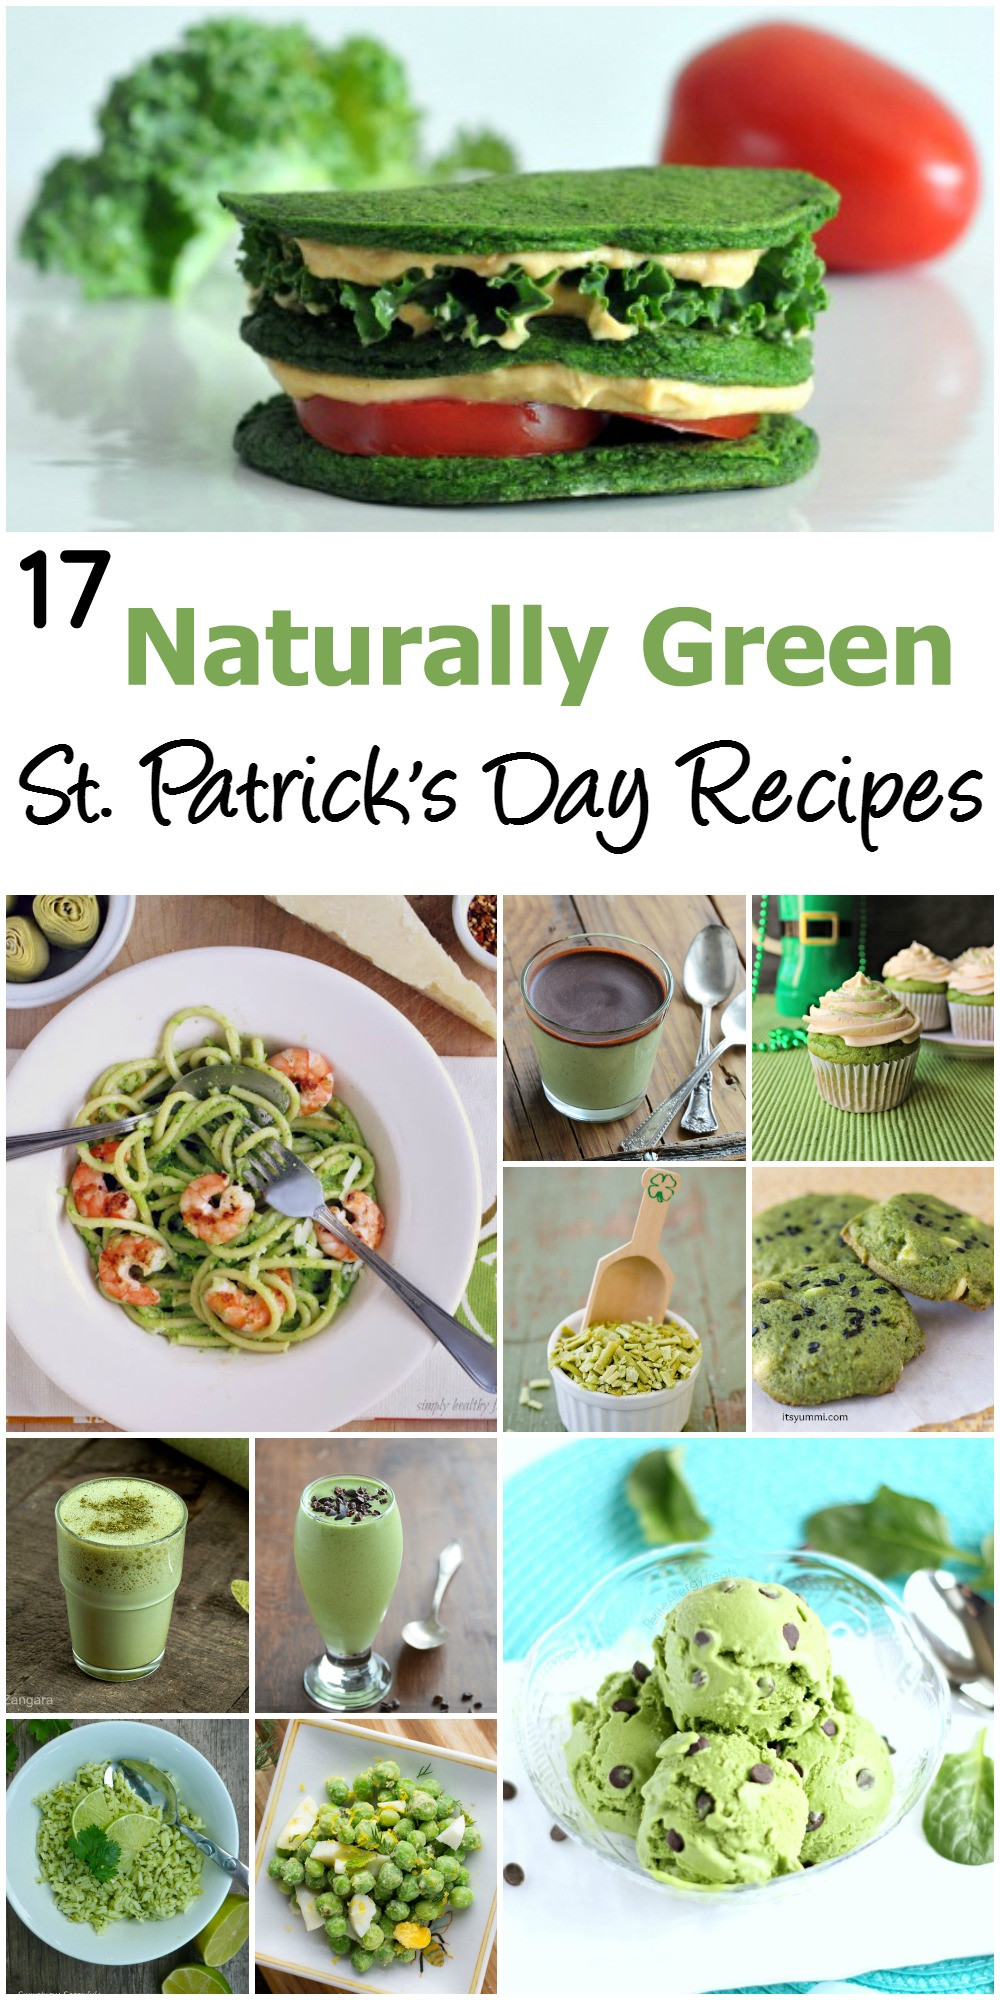 Green Food For St Patrick's Day
 Naturally Green Recipes for St Patrick s Day 17 for the